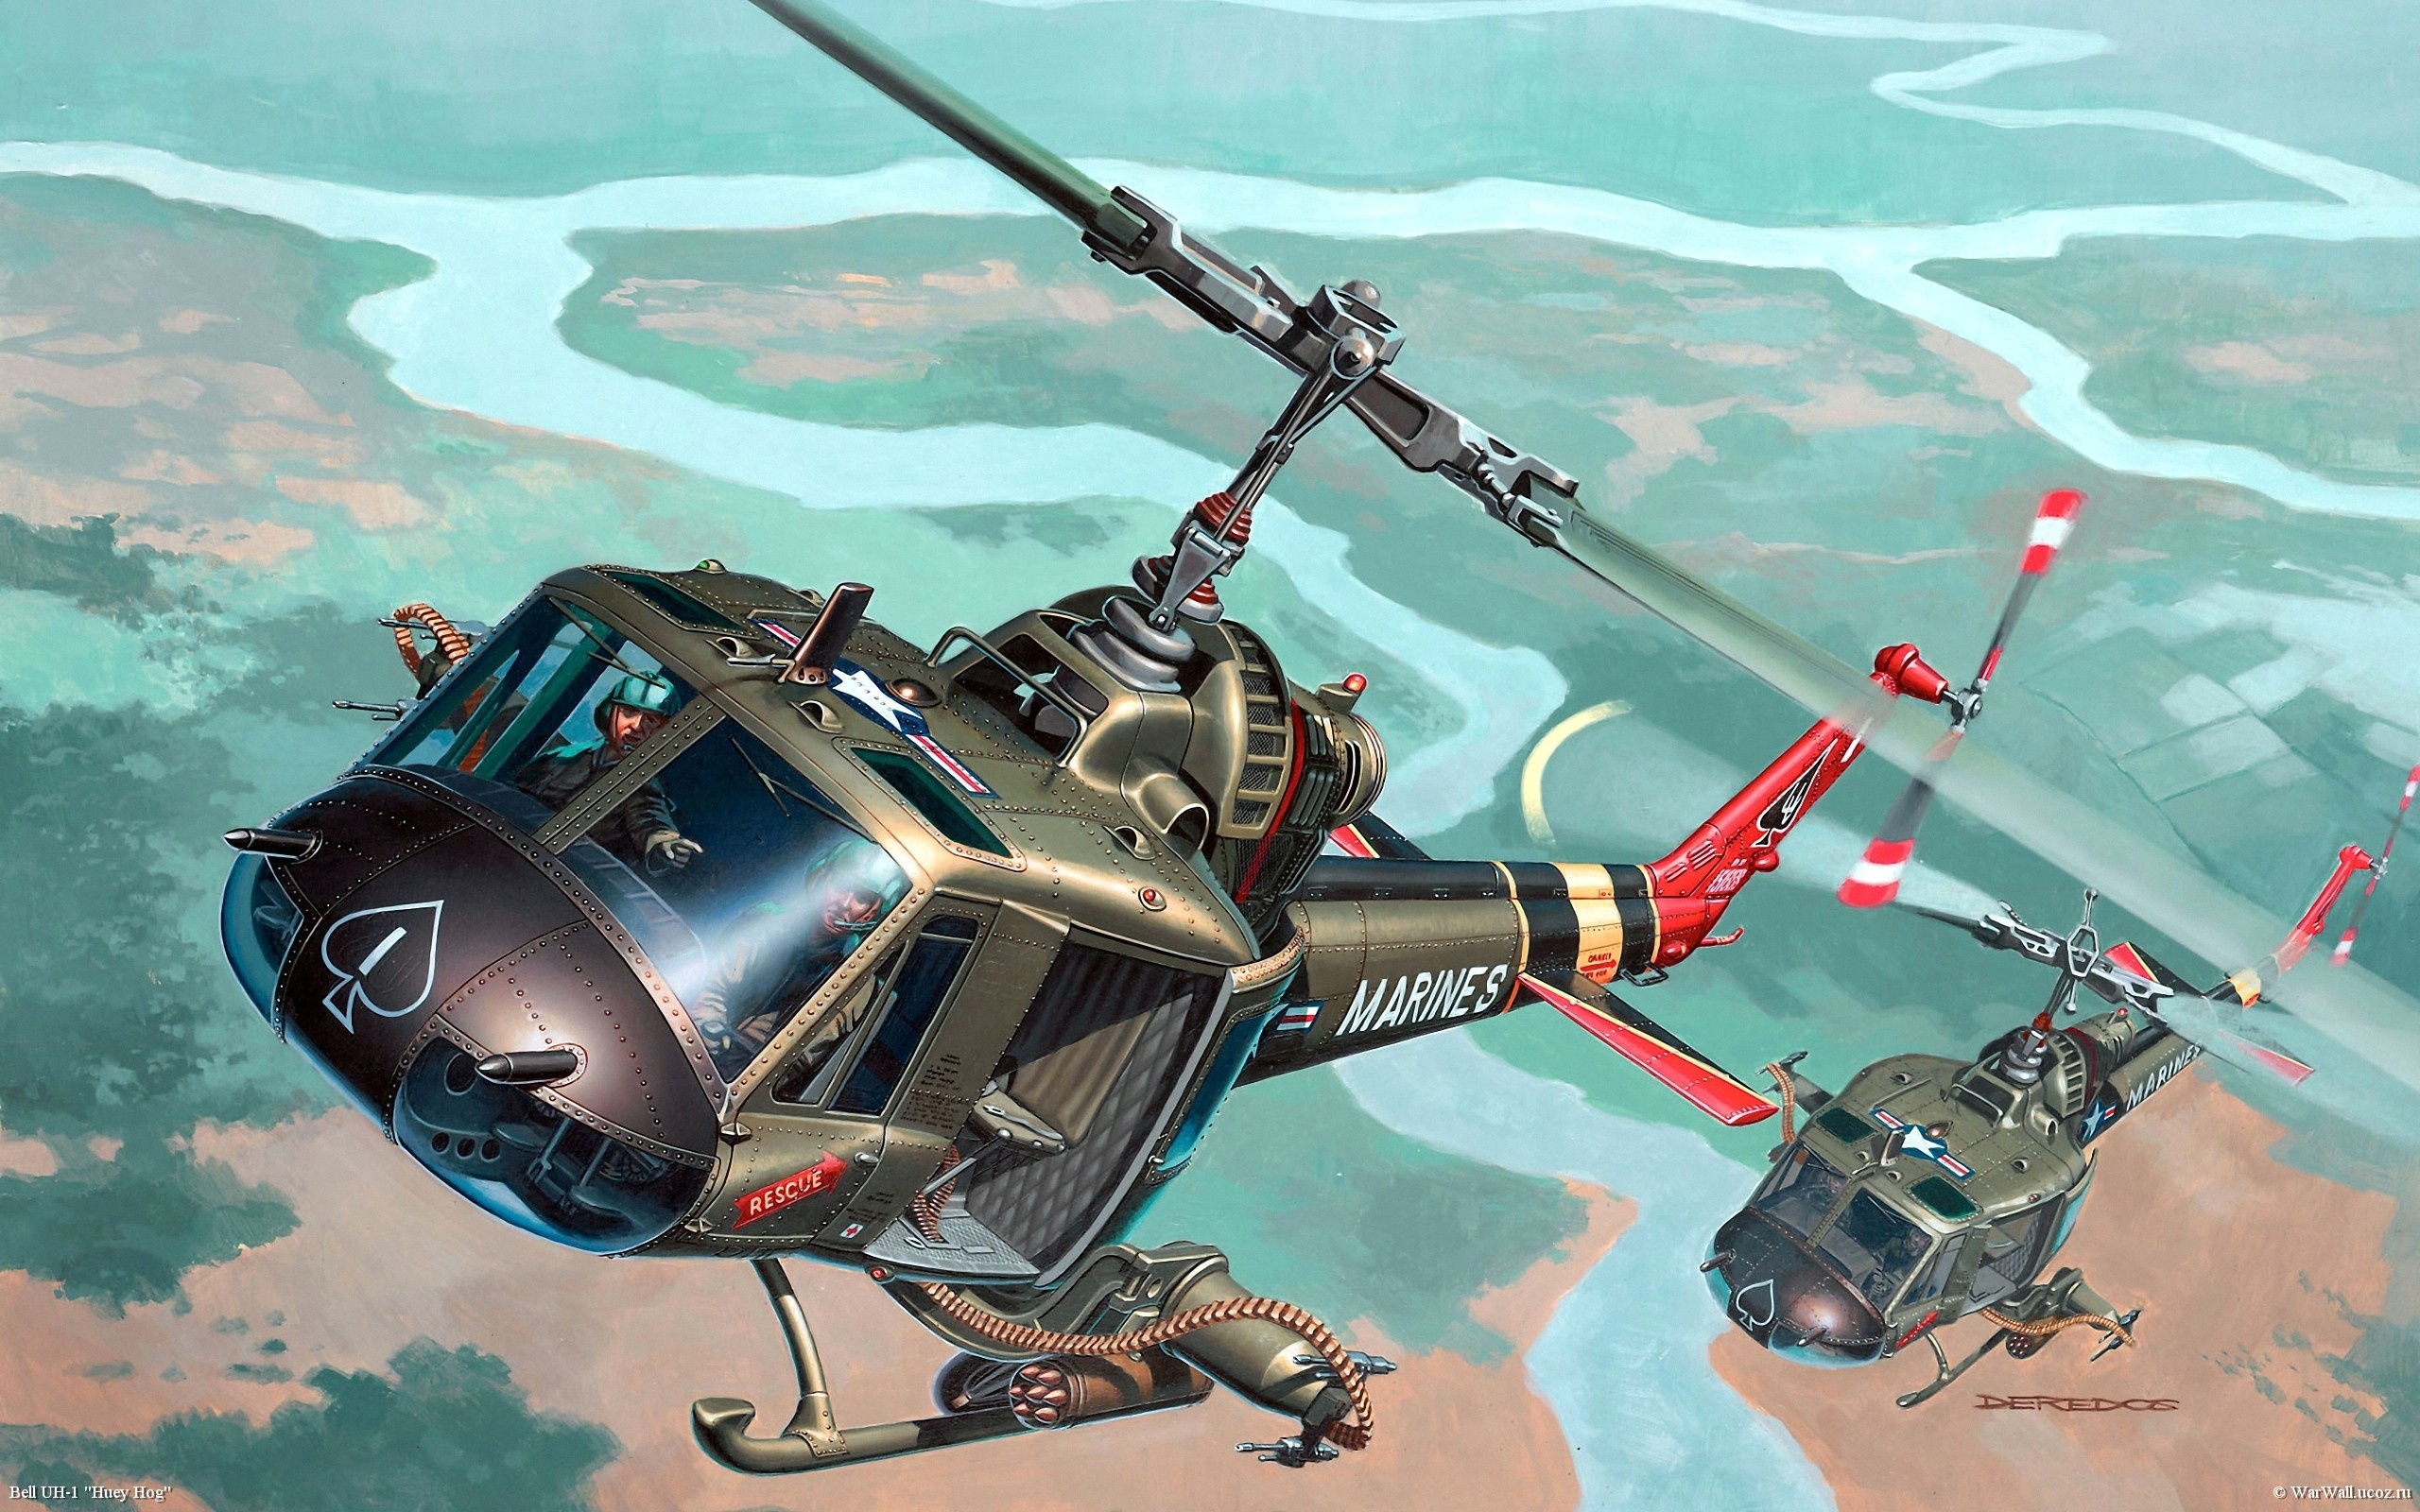 Bell Helicopter, UH-1 Iroquois, Helicopter wallpaper, Military aircraft, 2560x1600 HD Desktop